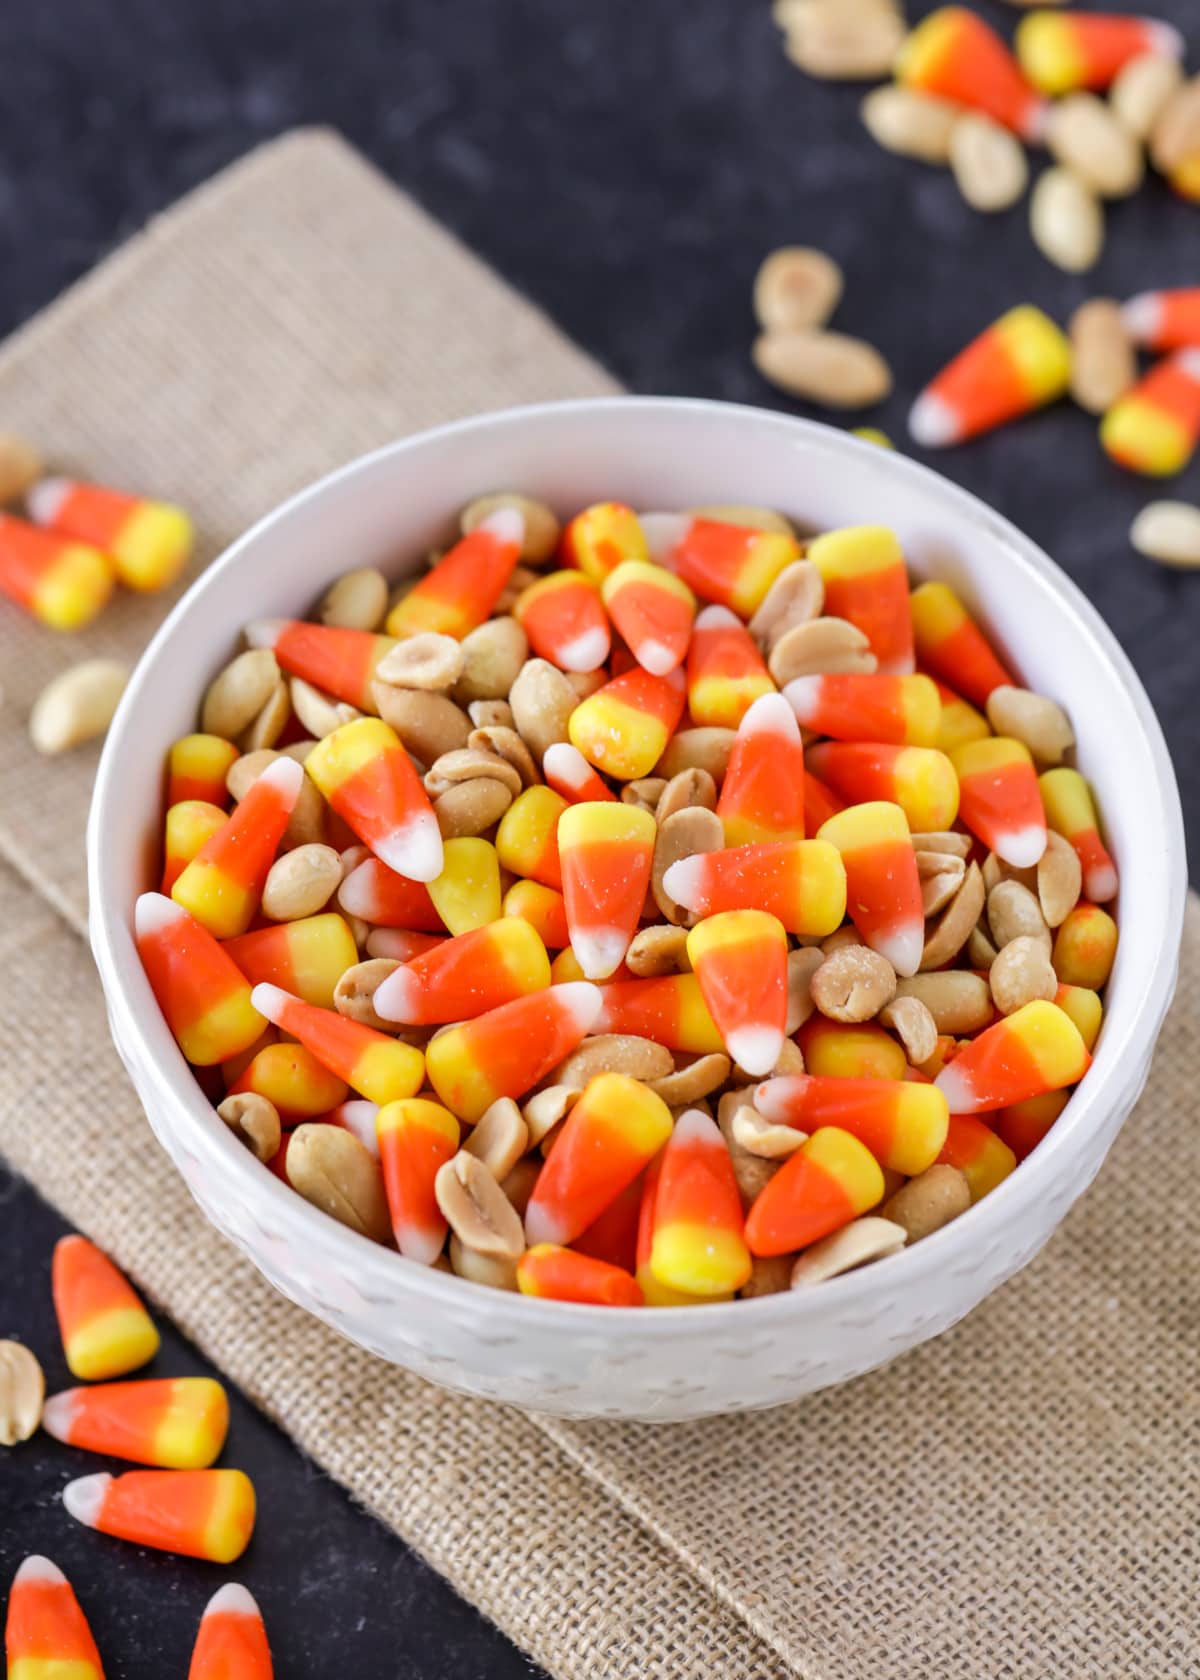 Candy corn and peanuts mix in white bowl close up image.